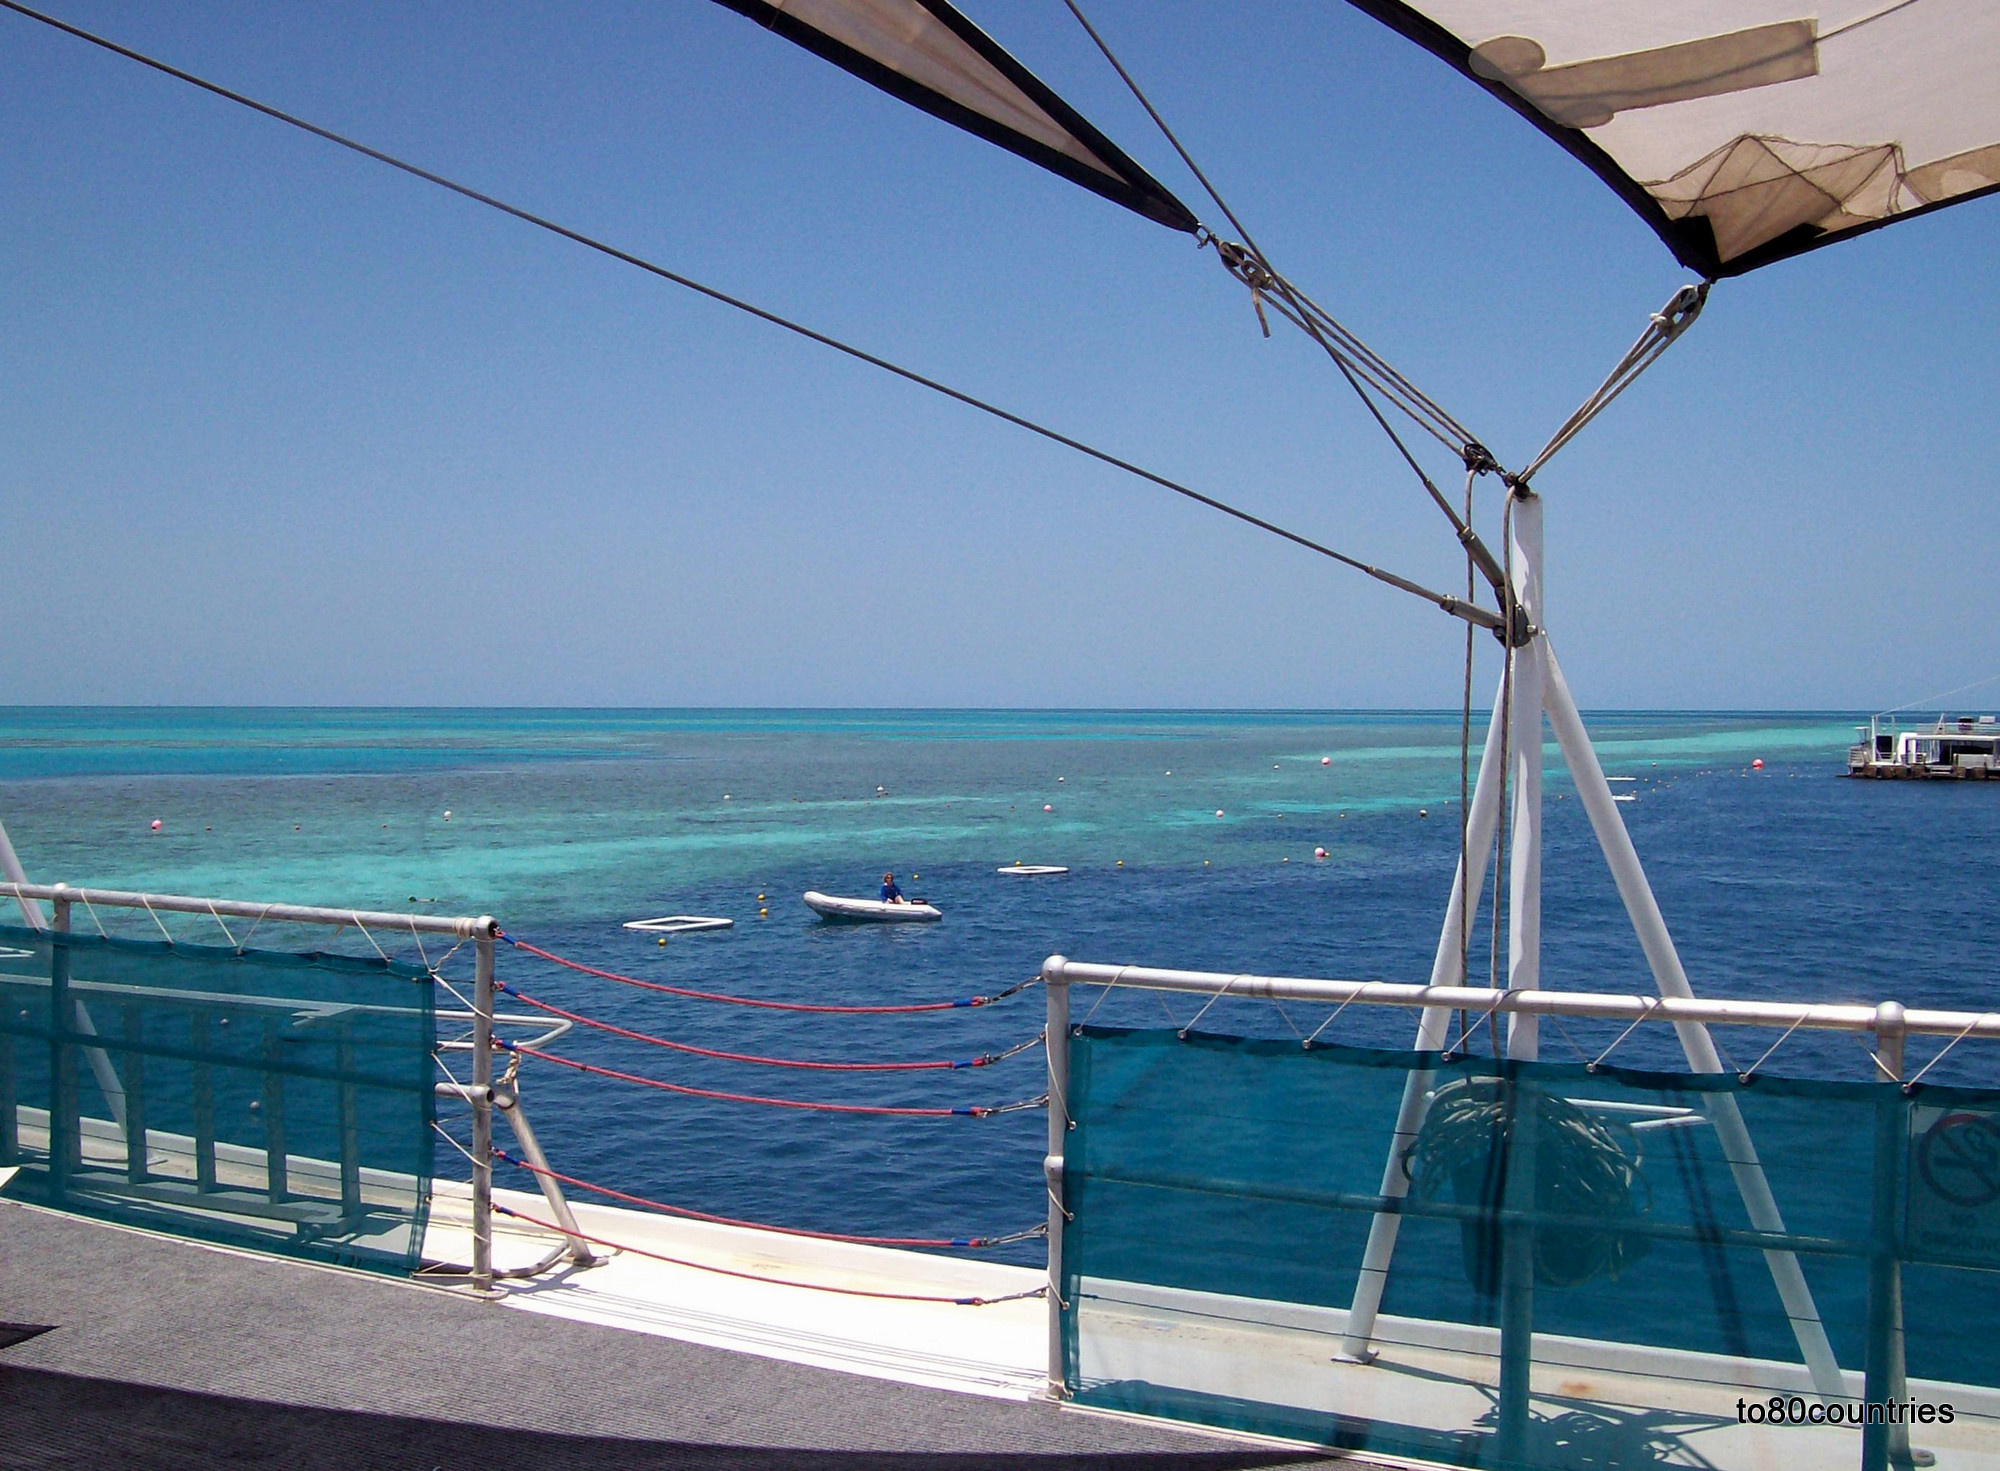 Reef World - Outer Great Barrier Reef - Queensland